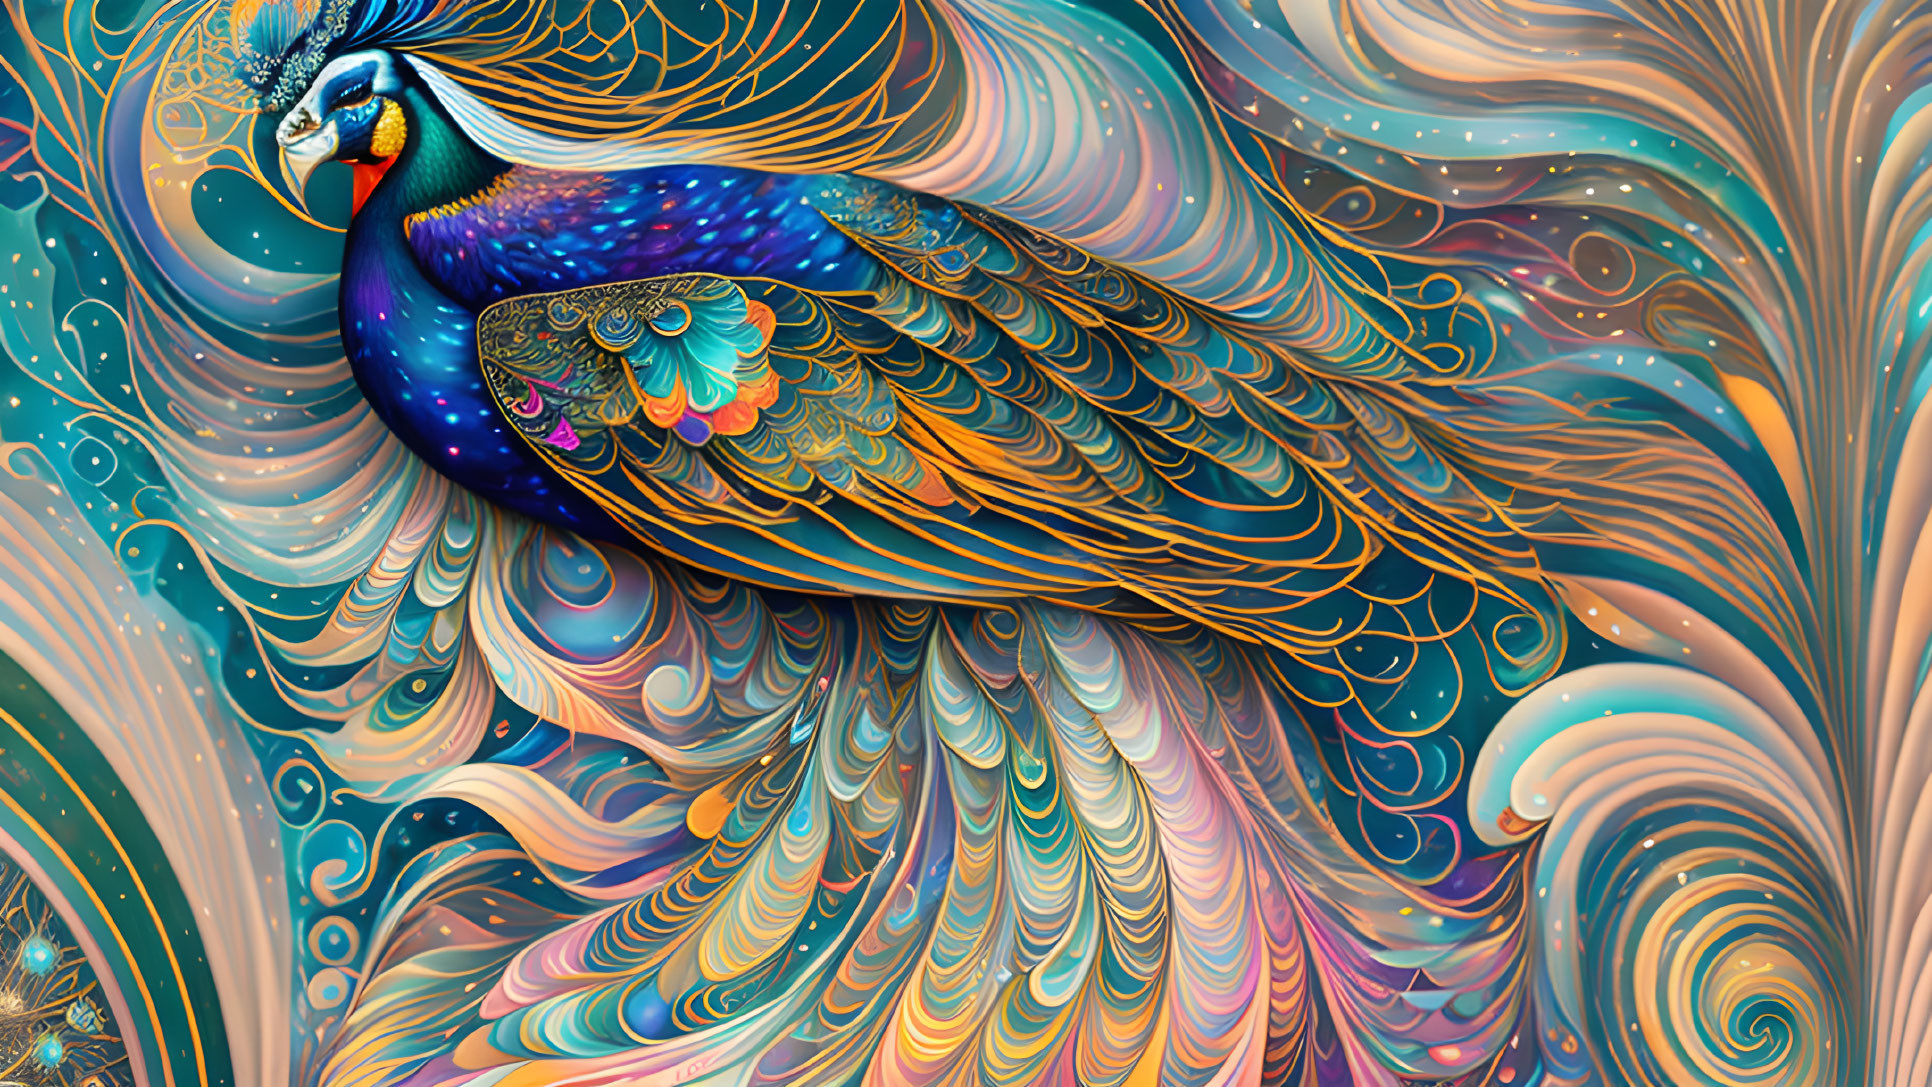 Abstract Peacock